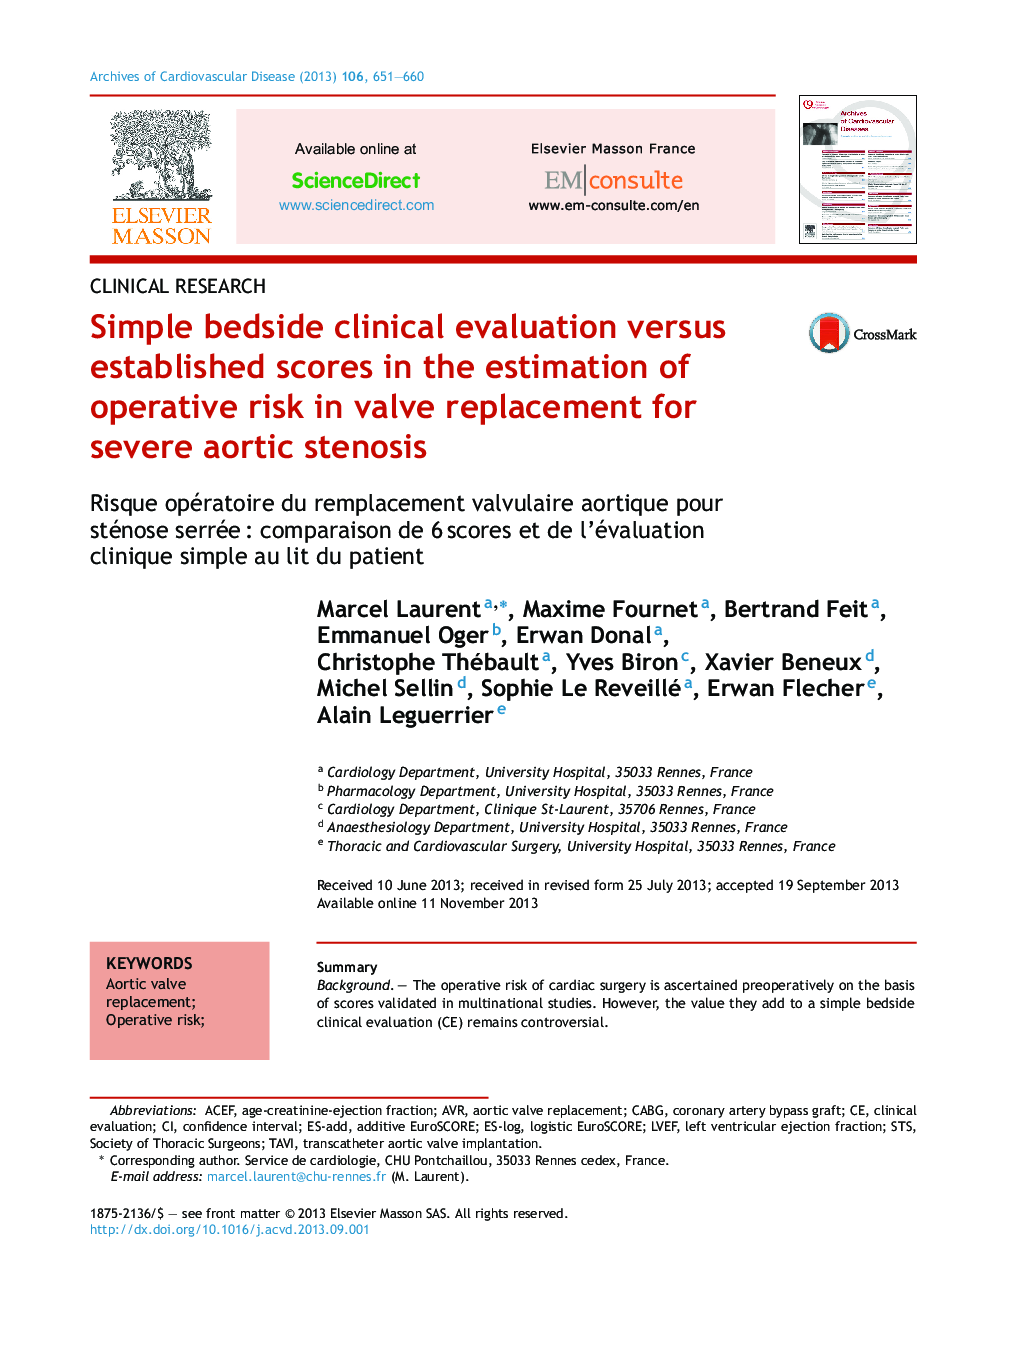 Simple bedside clinical evaluation versus established scores in the estimation of operative risk in valve replacement for severe aortic stenosis